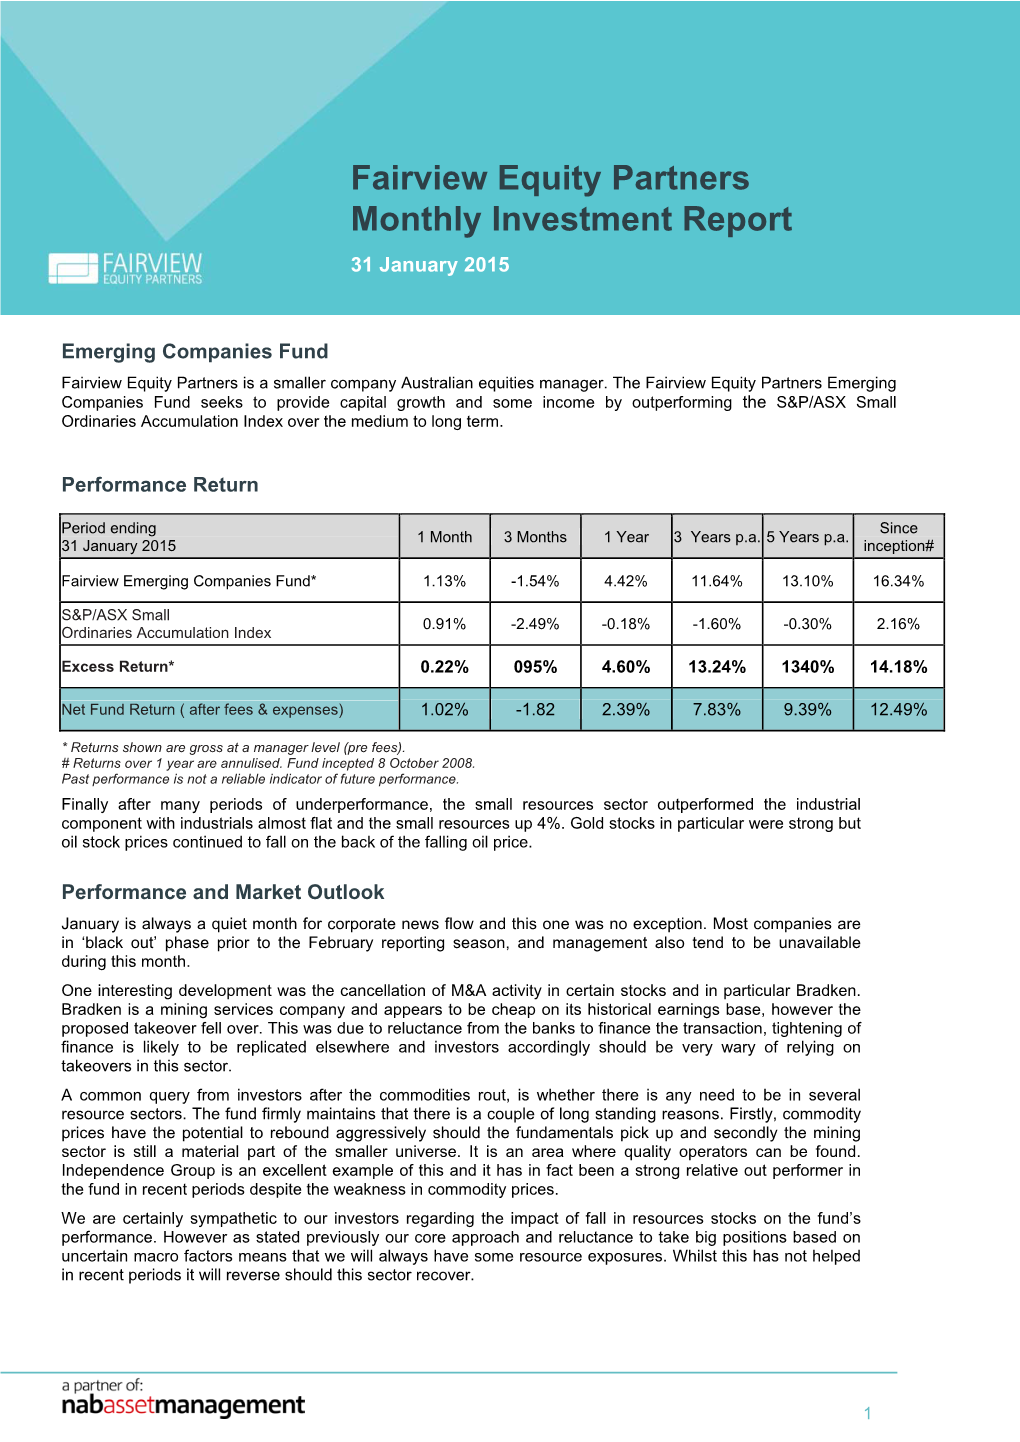 Fairview Equity Partners Monthly Investment Report 31 January 2015